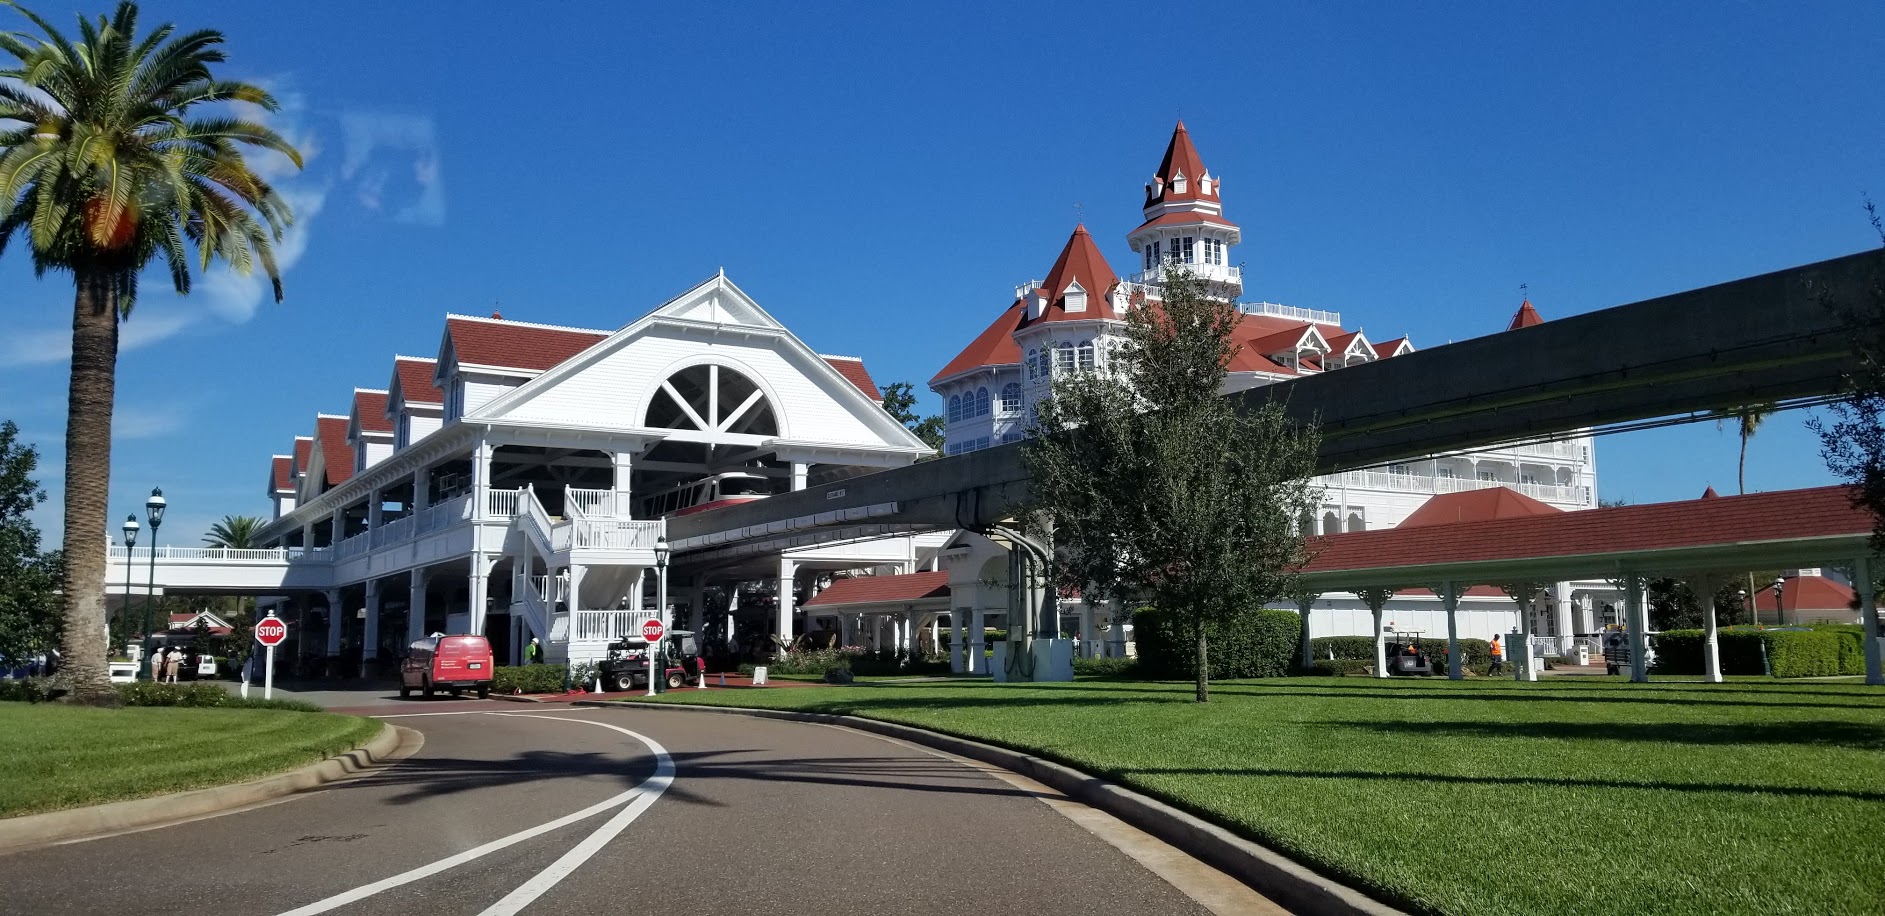 Walkway between Disney’s Grand Floridian and the Magic Kingdom in the works